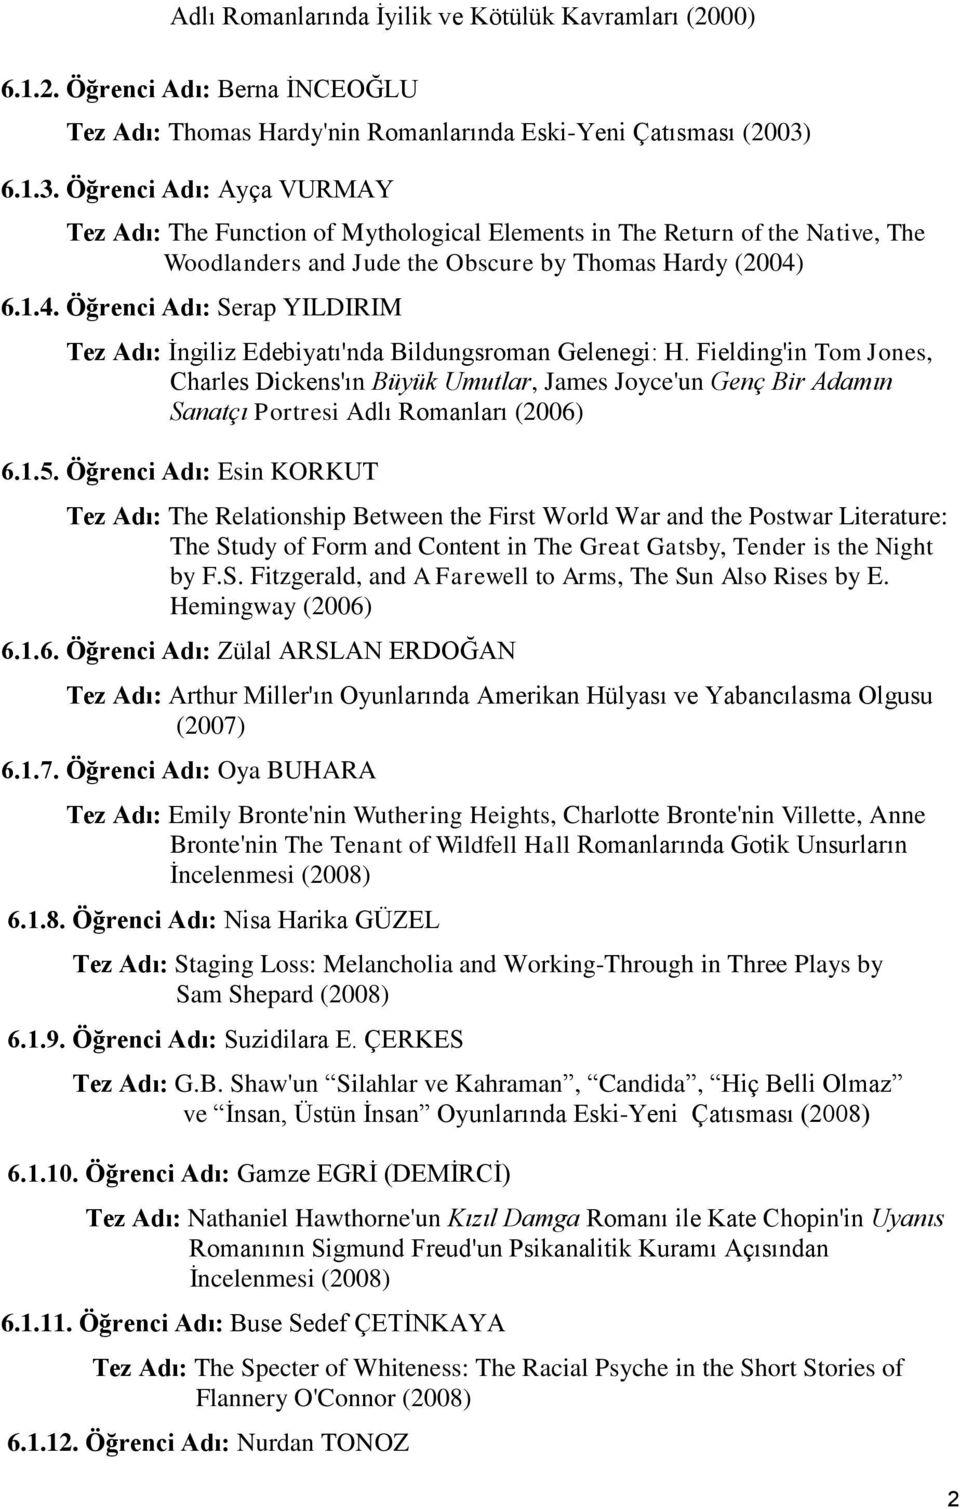 . Öğrenci Adı: Ayça VURMAY Tez Adı: The Function of Mythological Elements in The Return of the Native, The Woodlanders and Jude the Obscure by Thomas Hardy (2004)